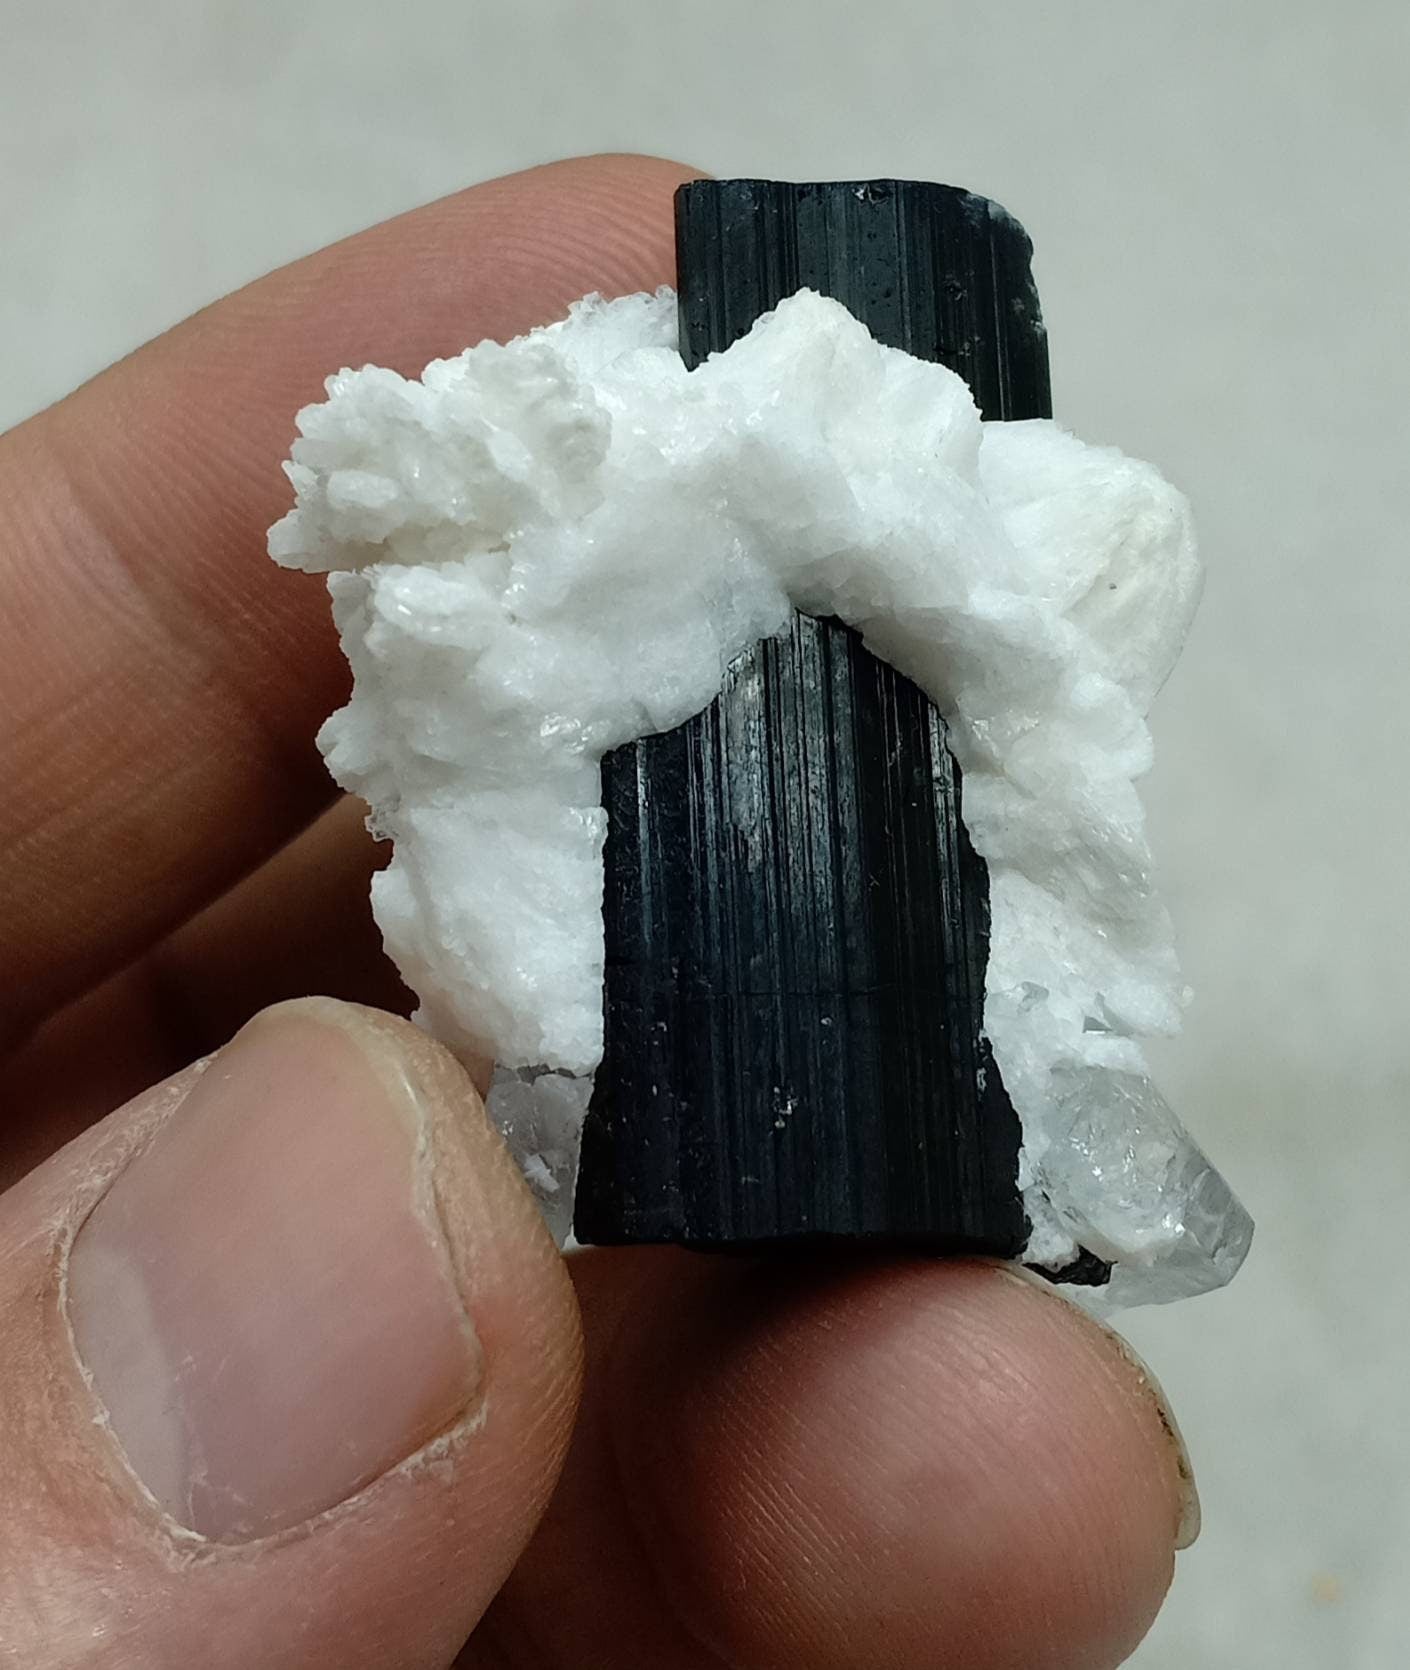 Black Tourmaline crystal with embedded Aquamarine and associated albite 35g